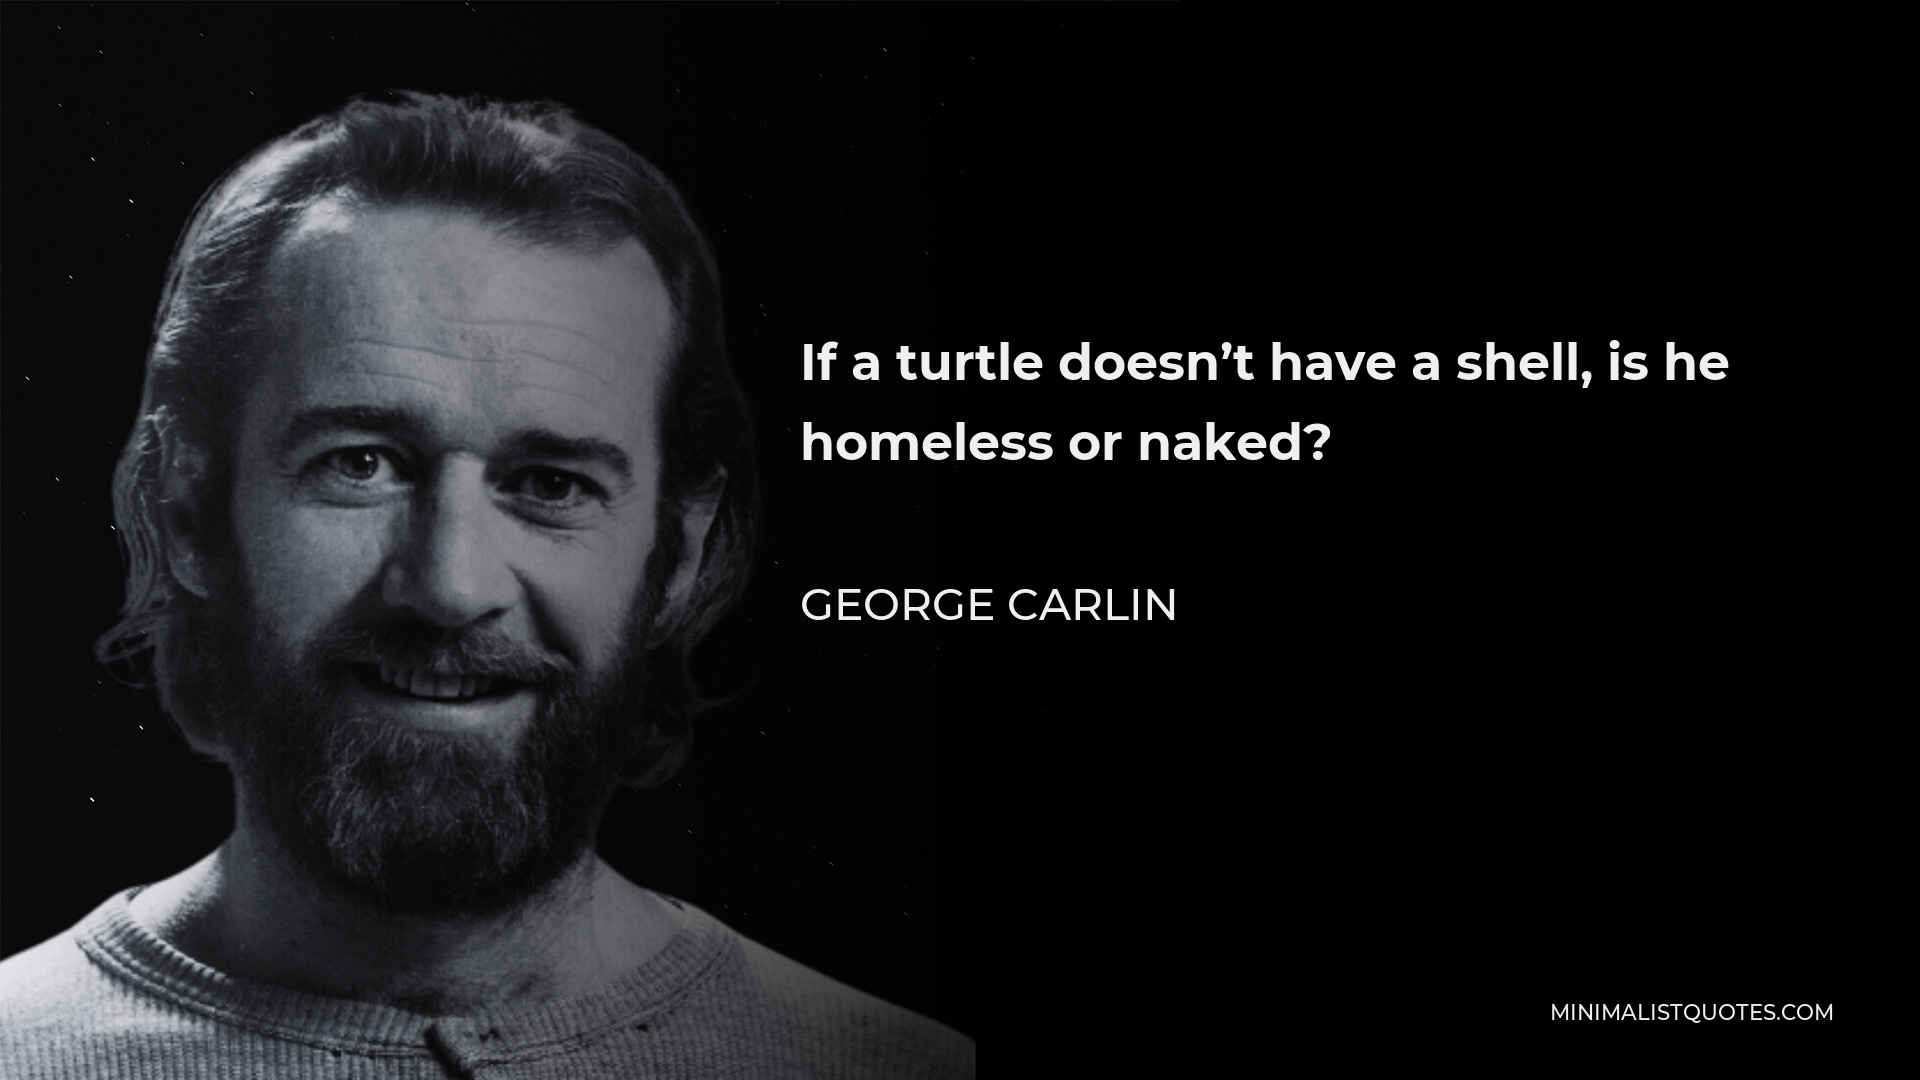 George Carlin Quote - If a turtle doesn’t have a shell, is he homeless or naked?